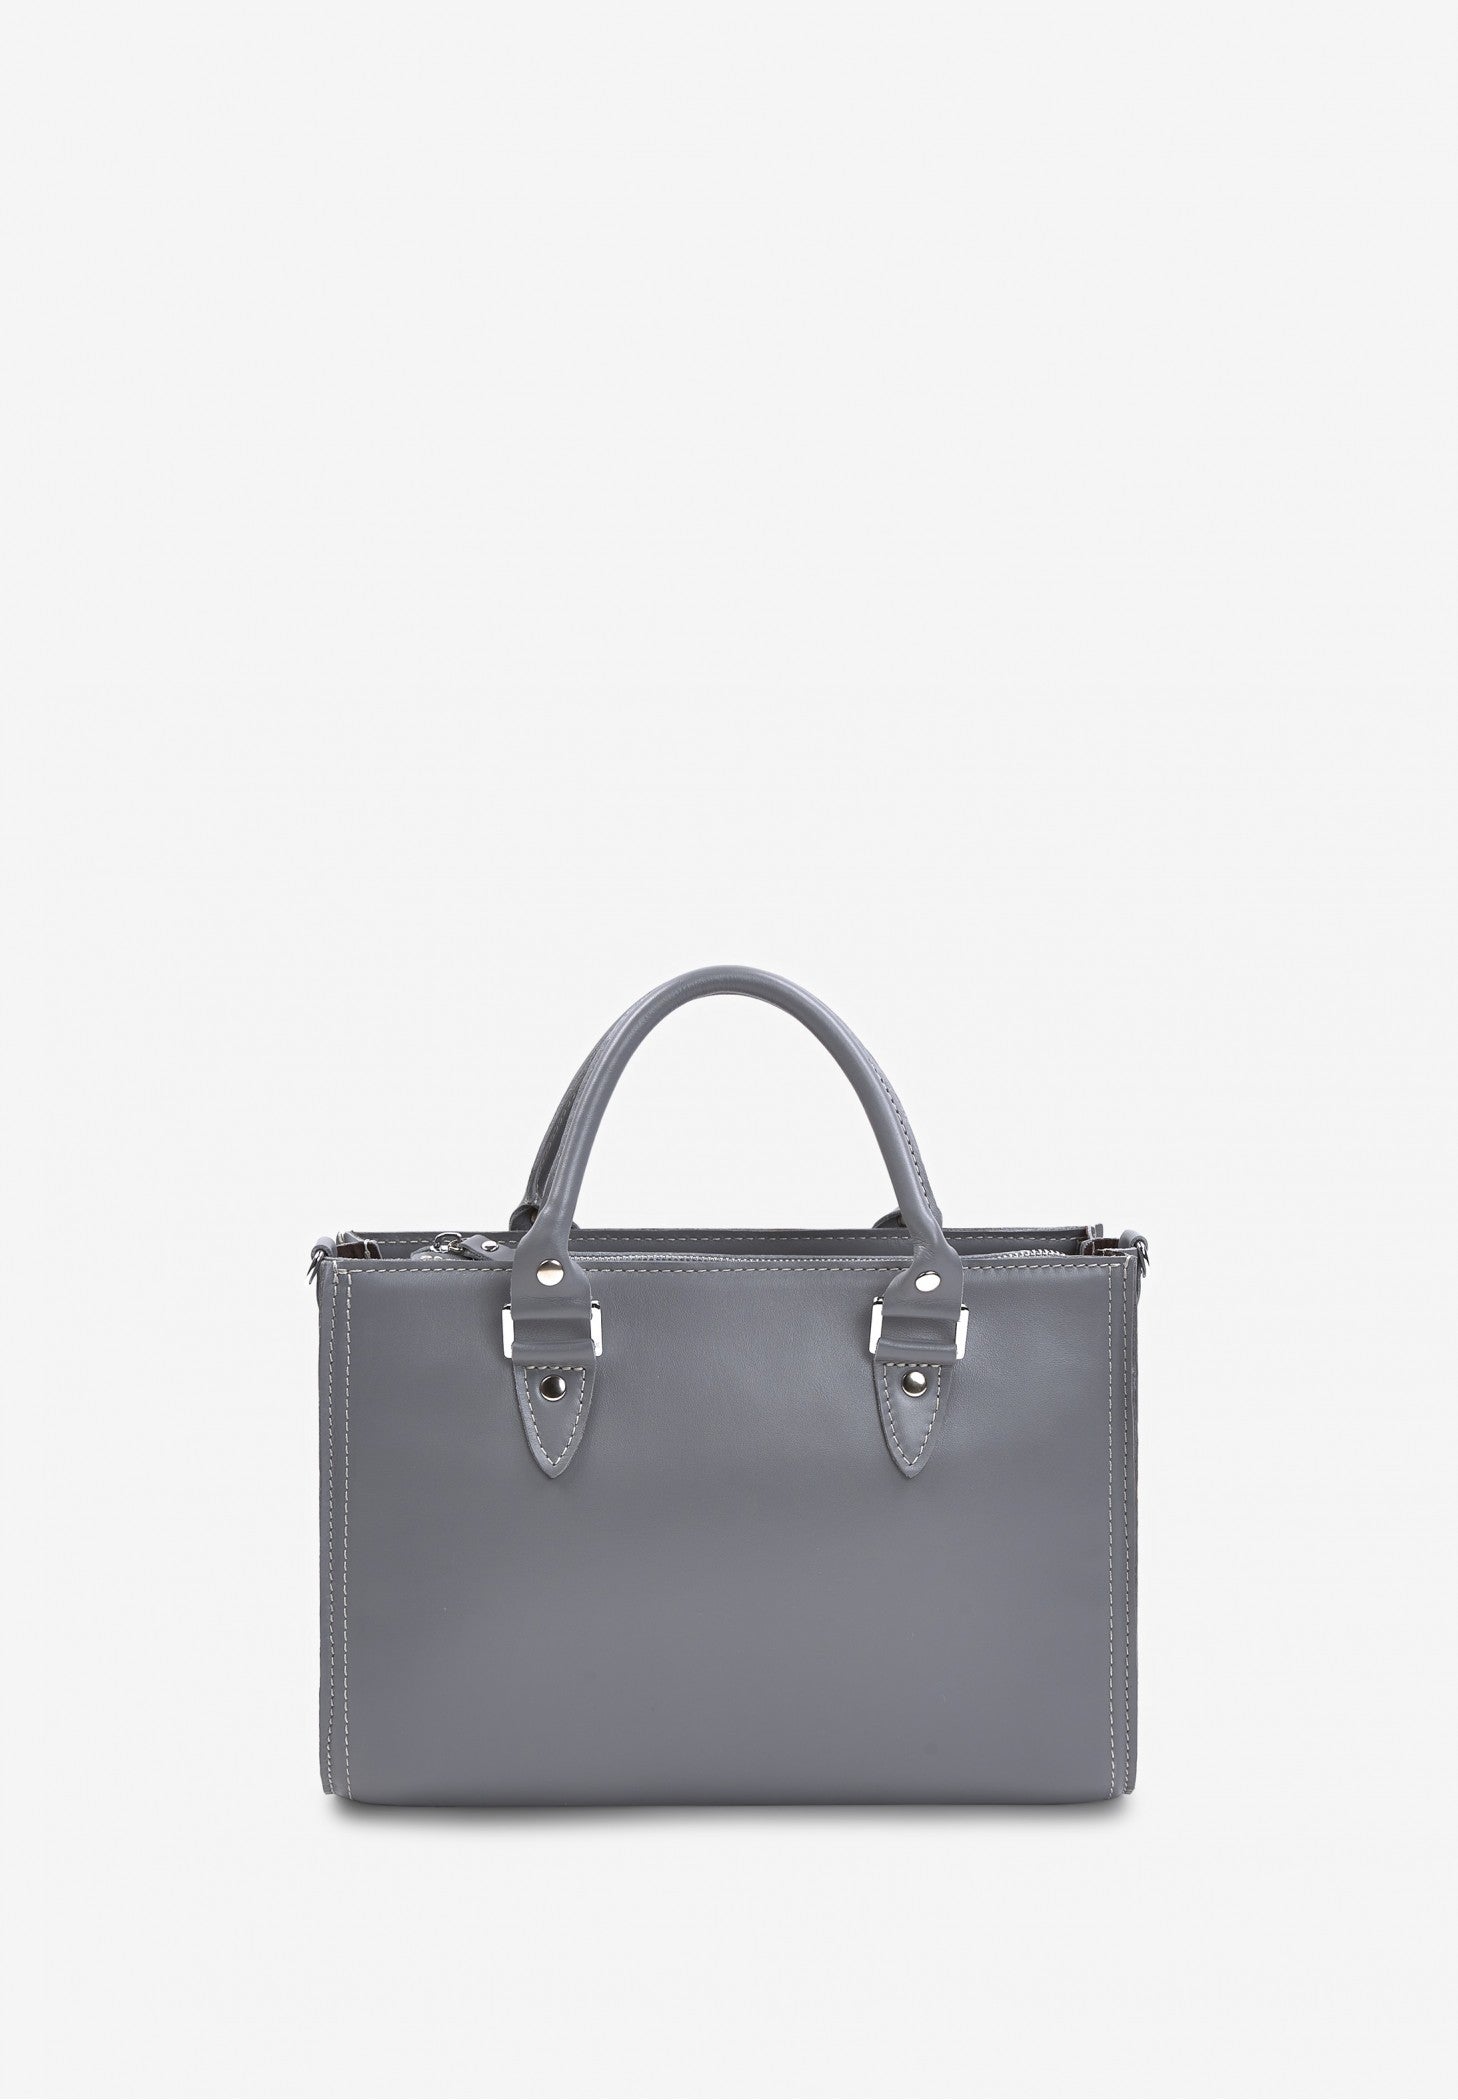 grey leather bag for women